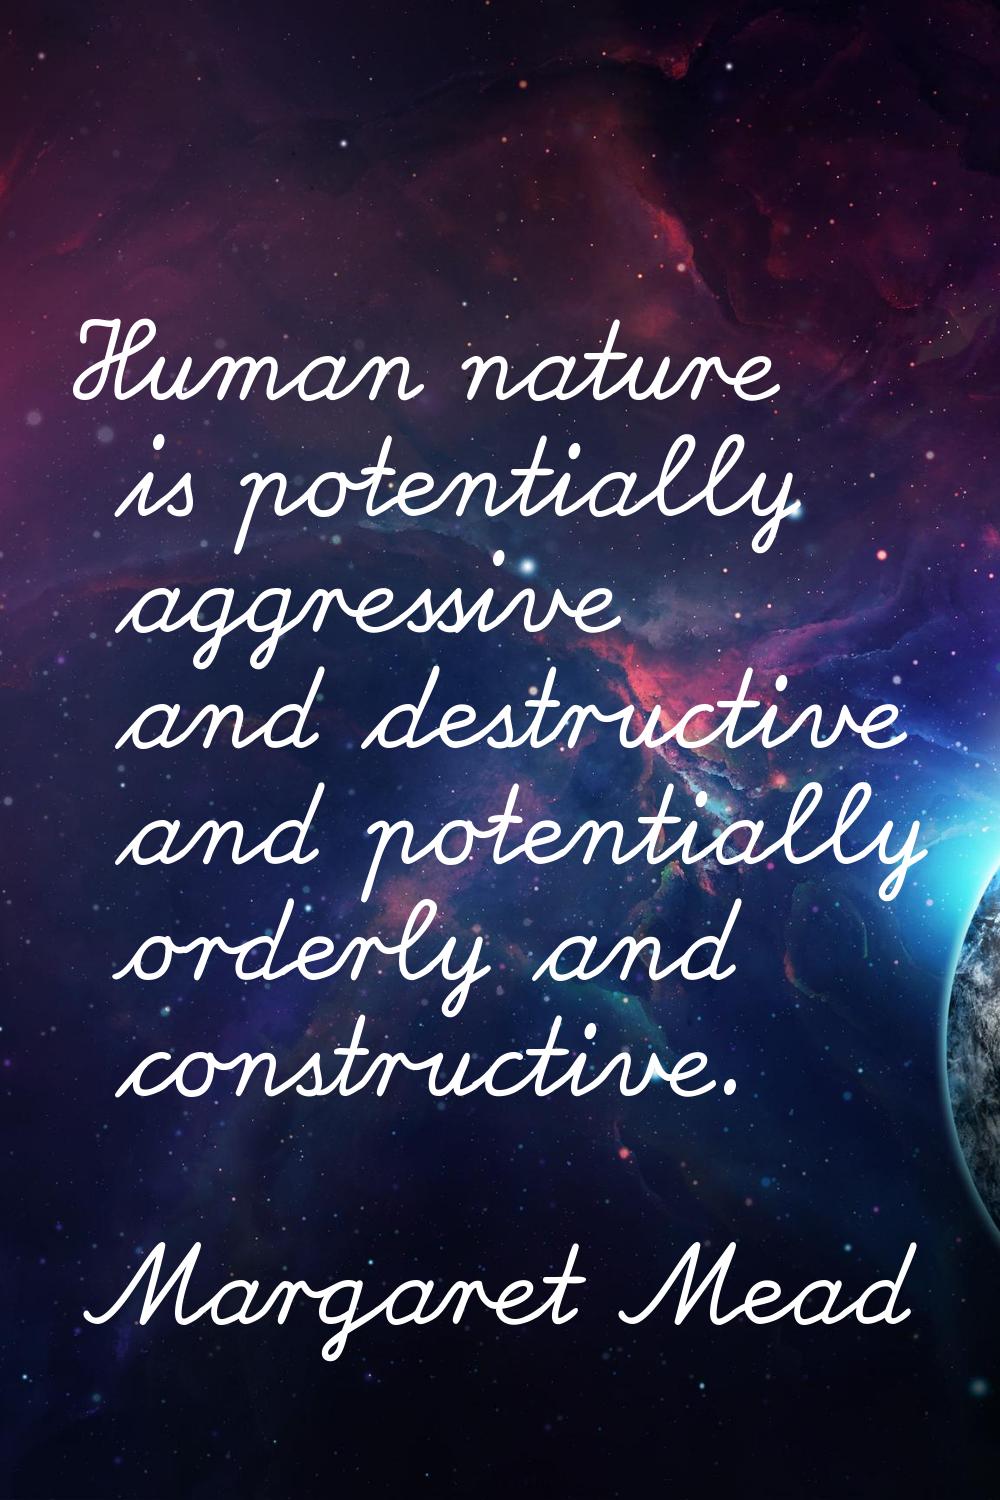 Human nature is potentially aggressive and destructive and potentially orderly and constructive.